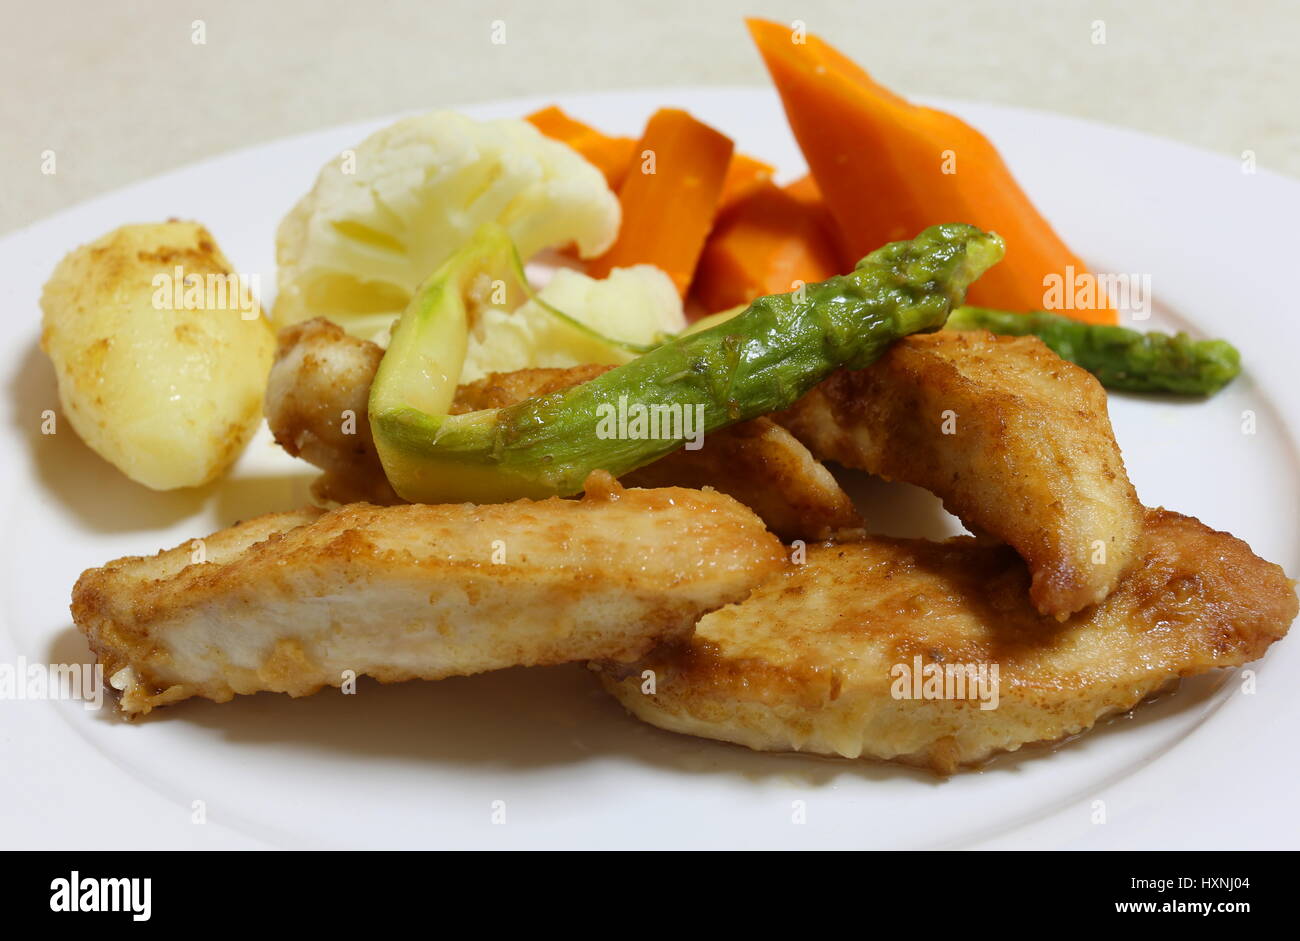 Pan fried chicken, coated with seasoned flour and served with asparagus and steamed vegetables Stock Photo